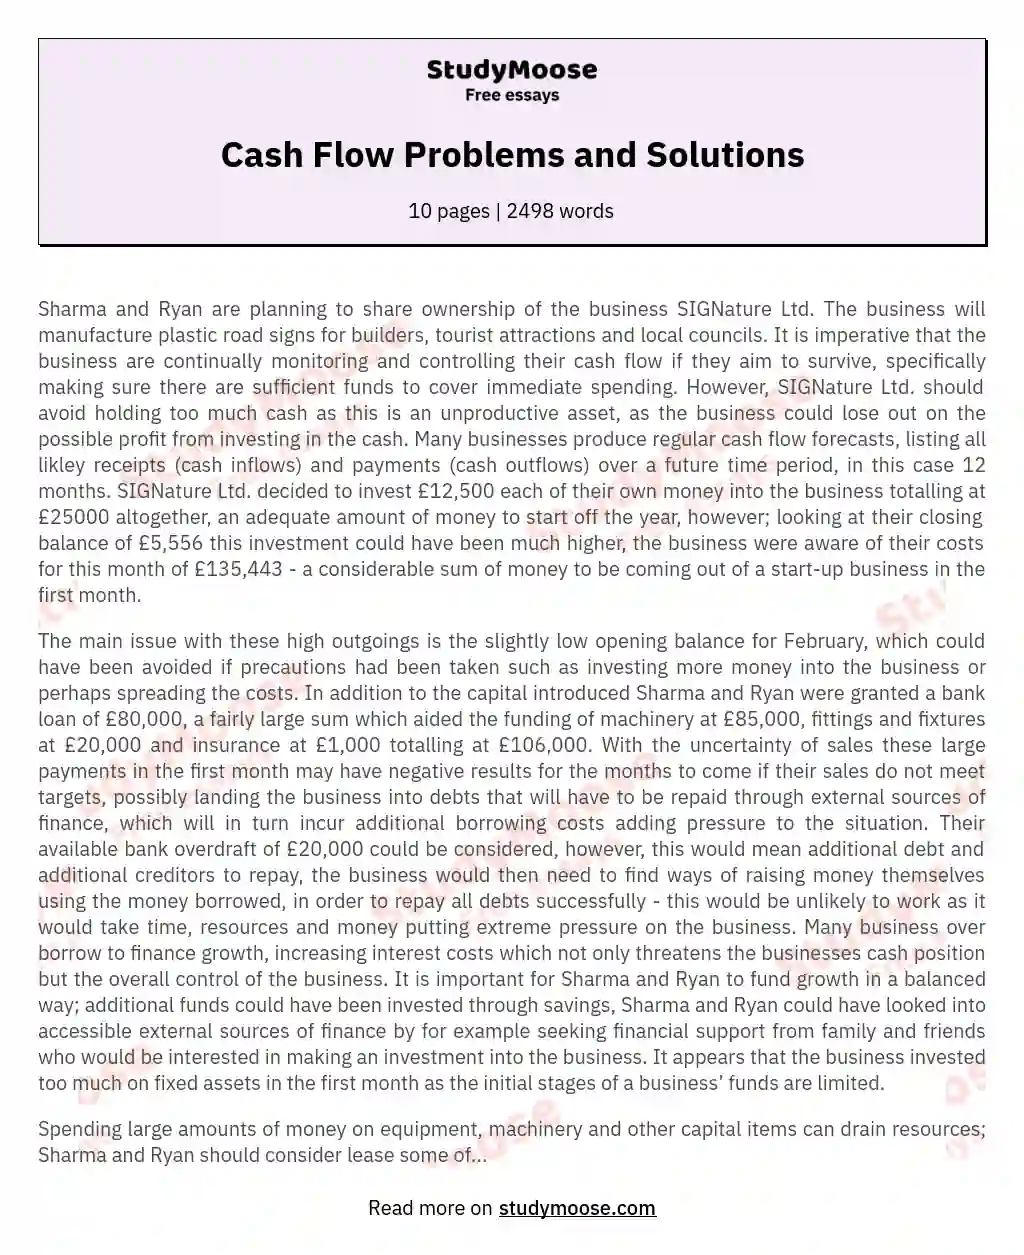 Cash Flow Problems and Solutions